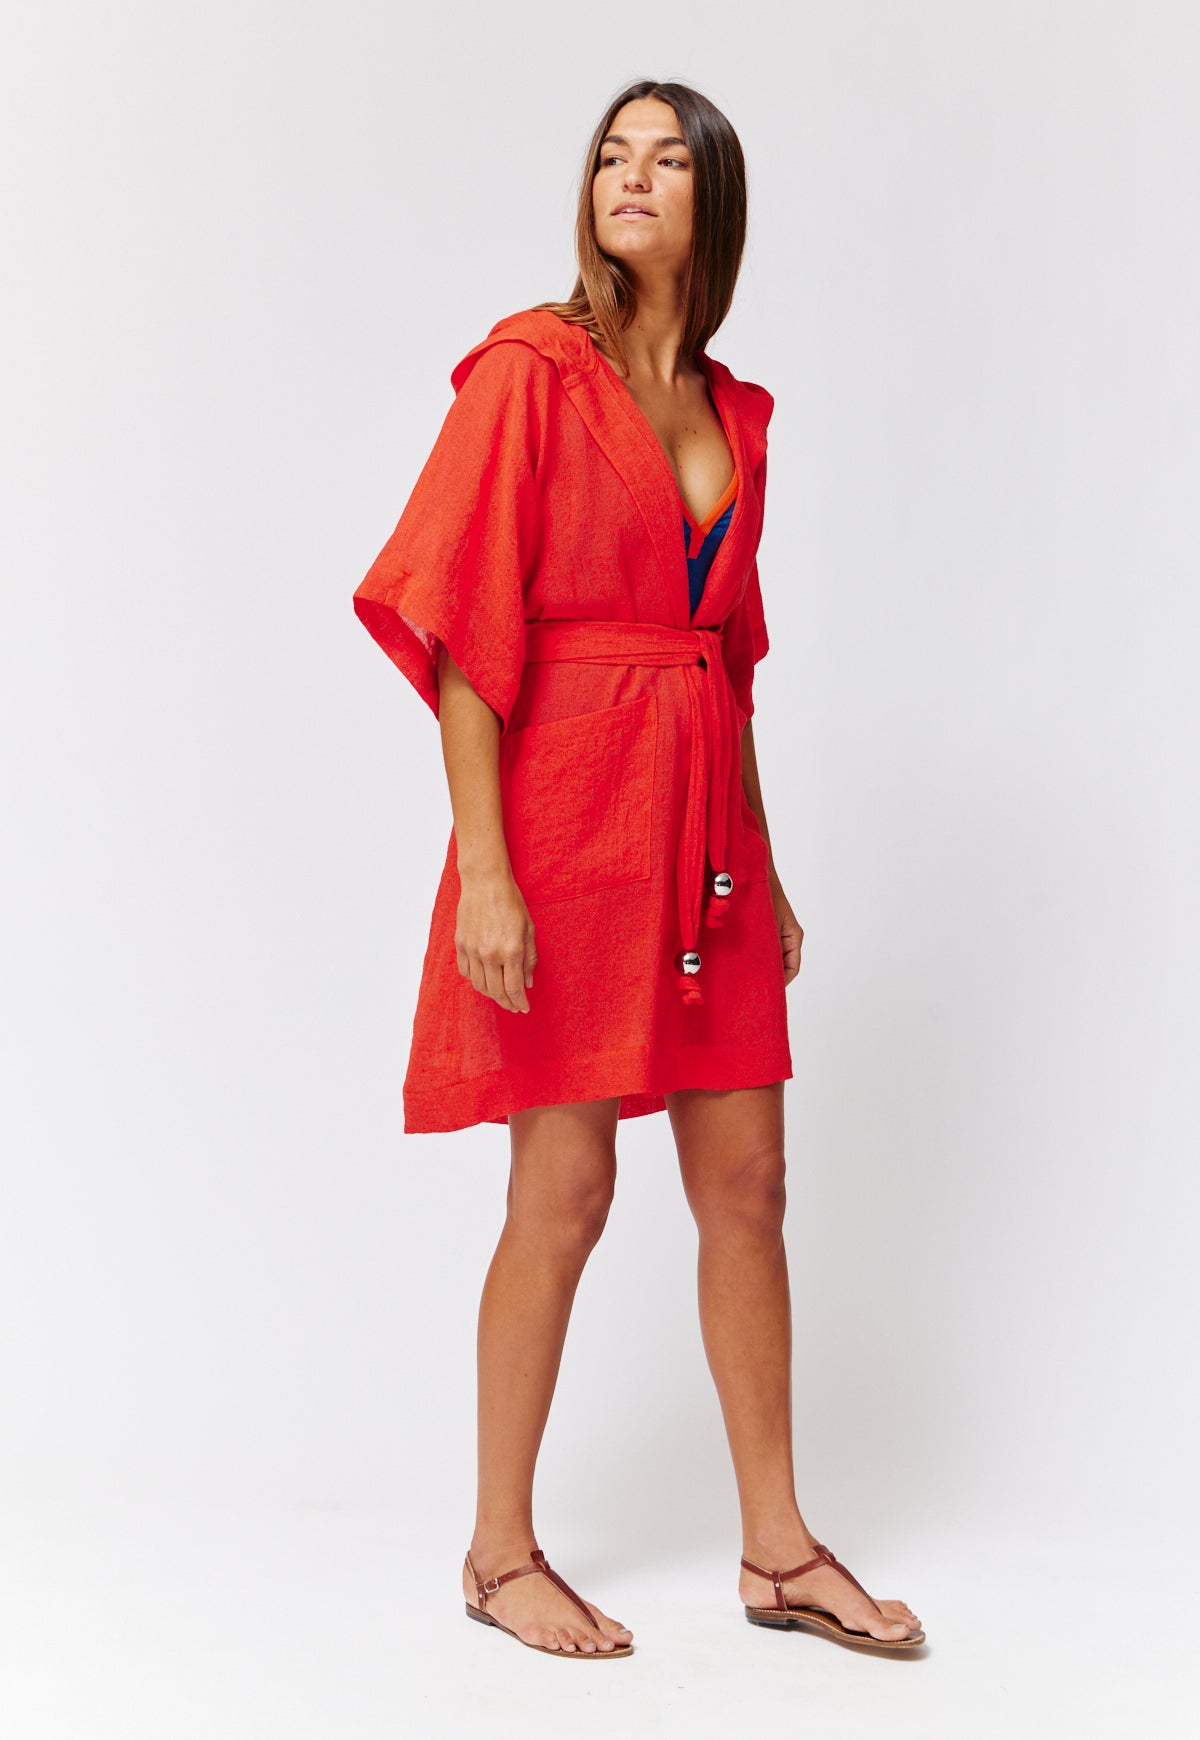 THE HOODED DRESSING GOWN in RED ORGANIC GAUZE